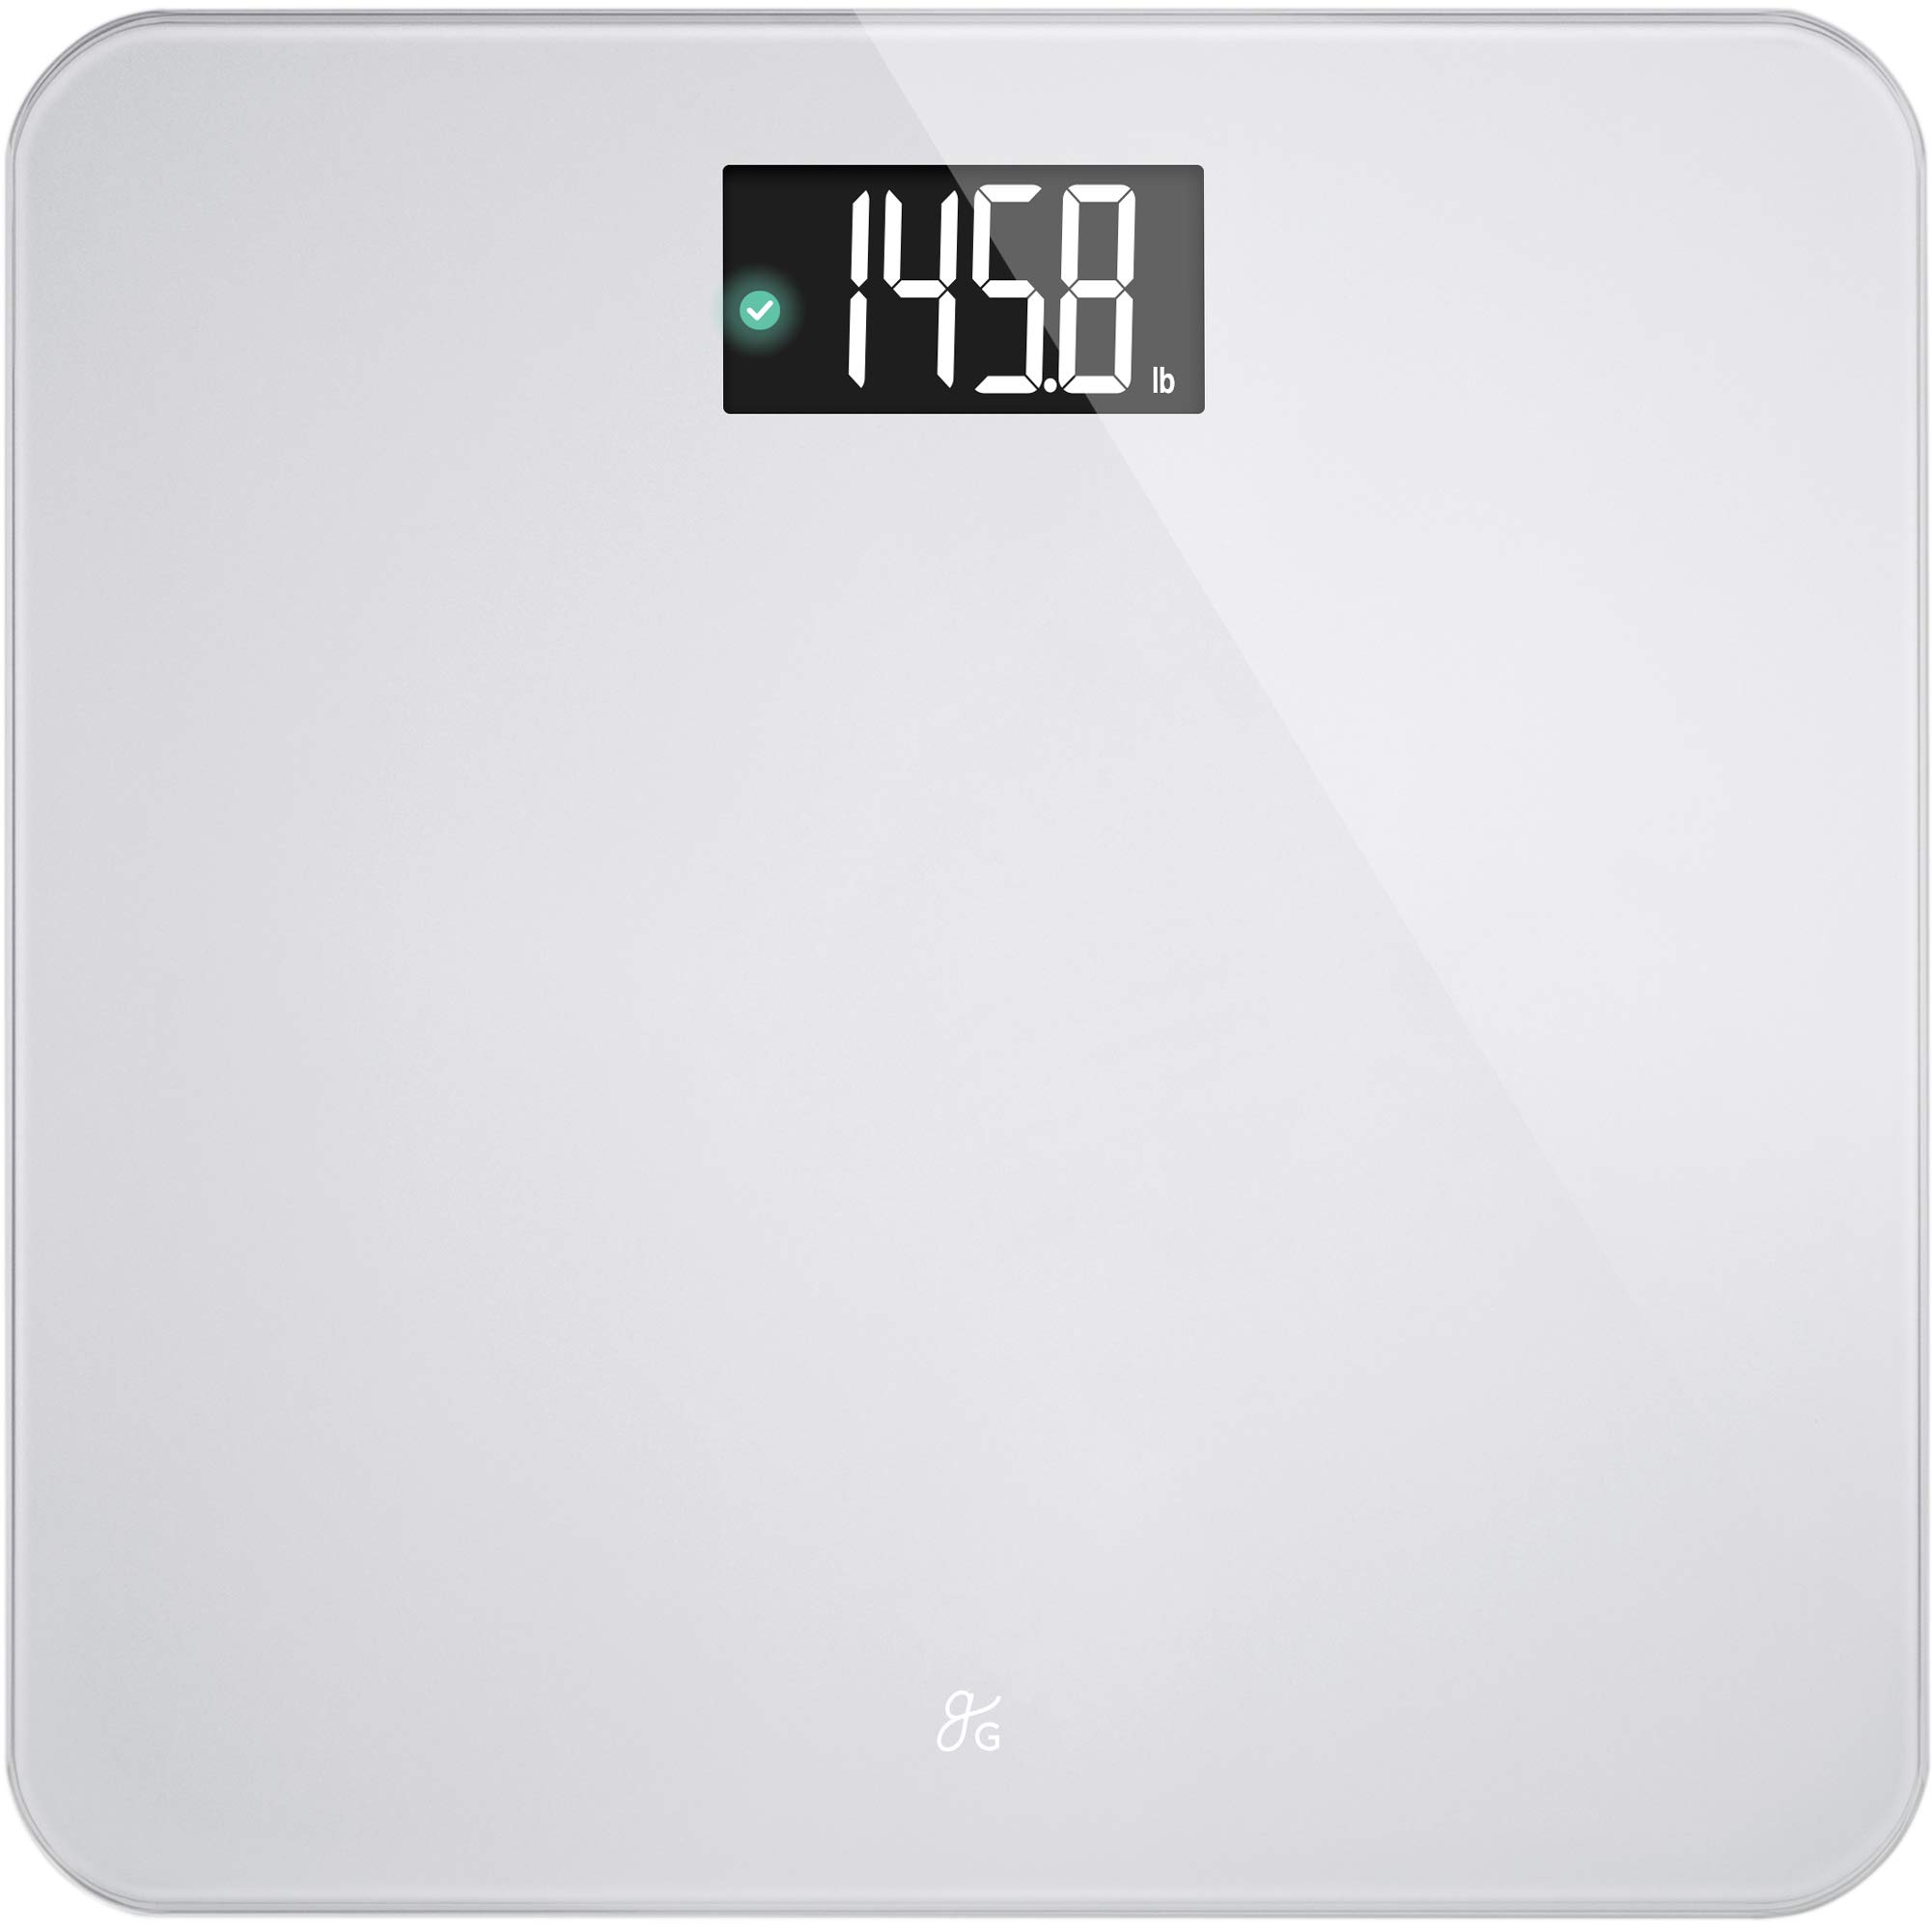 AccuCheck Digital Body Weight Scale from Greater Goods, Patent